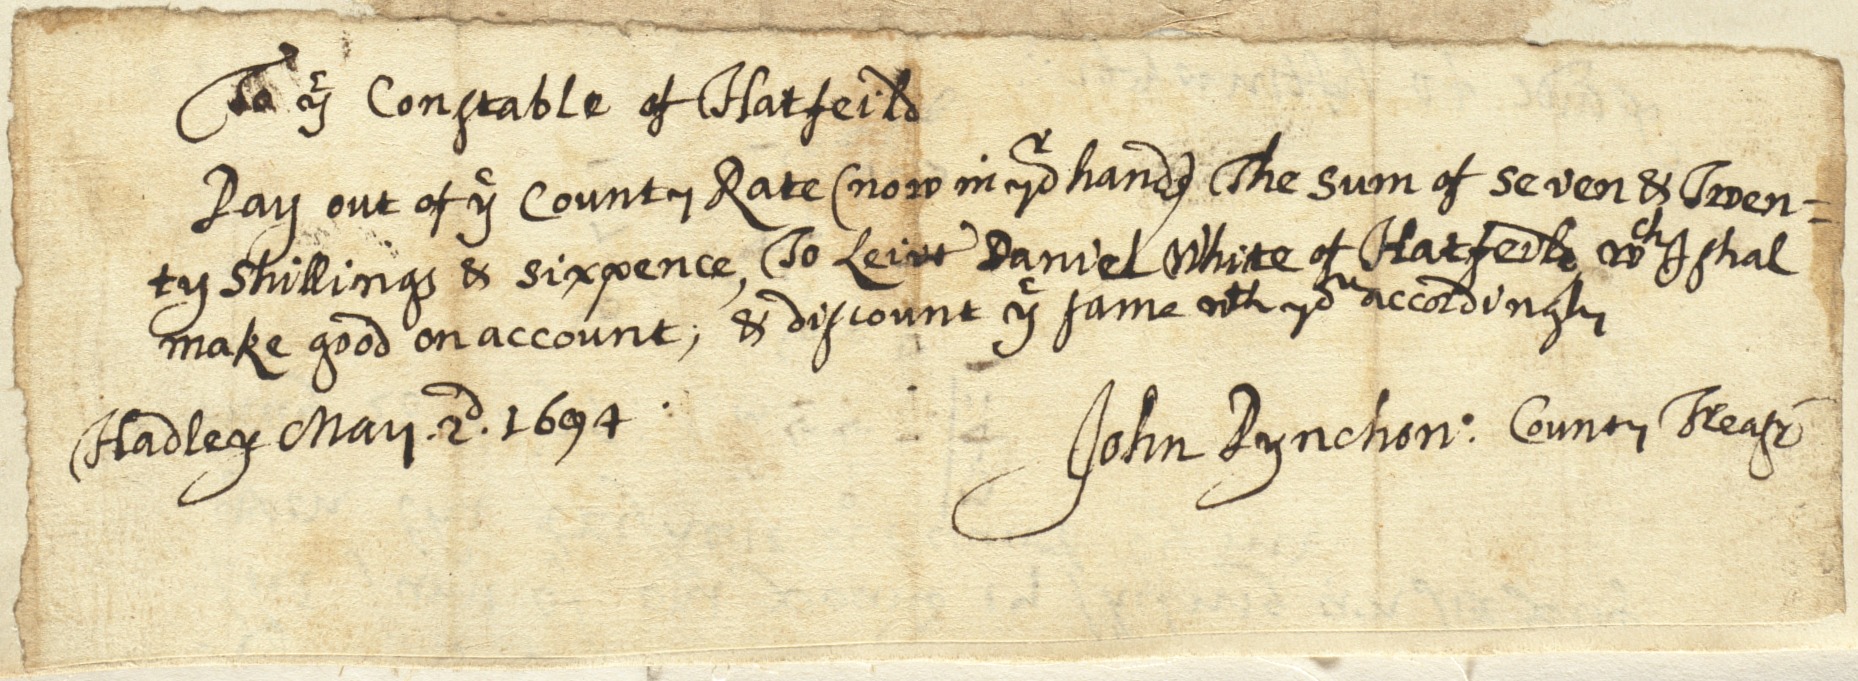 Note to Constable of Hatfield from John Pynchon, Hadley, May 2, 1694